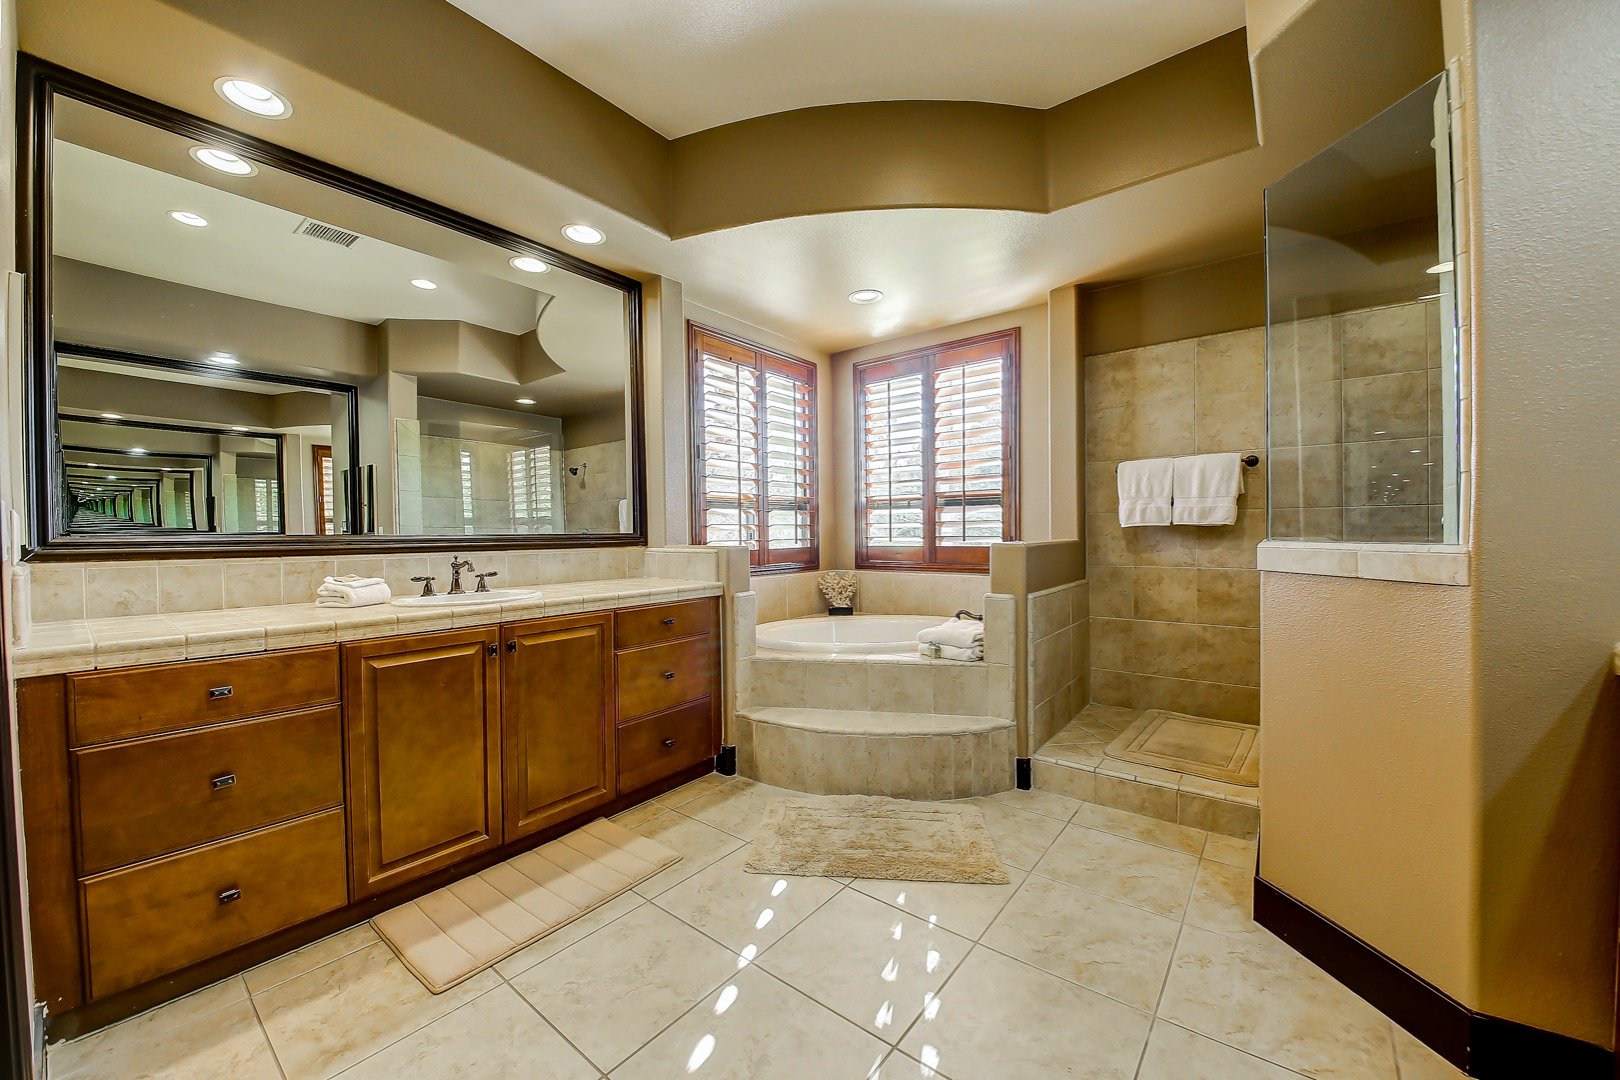 Master Suite 1 bathroom features a soaking tub, tile shower, and his and her vanity sinks. 